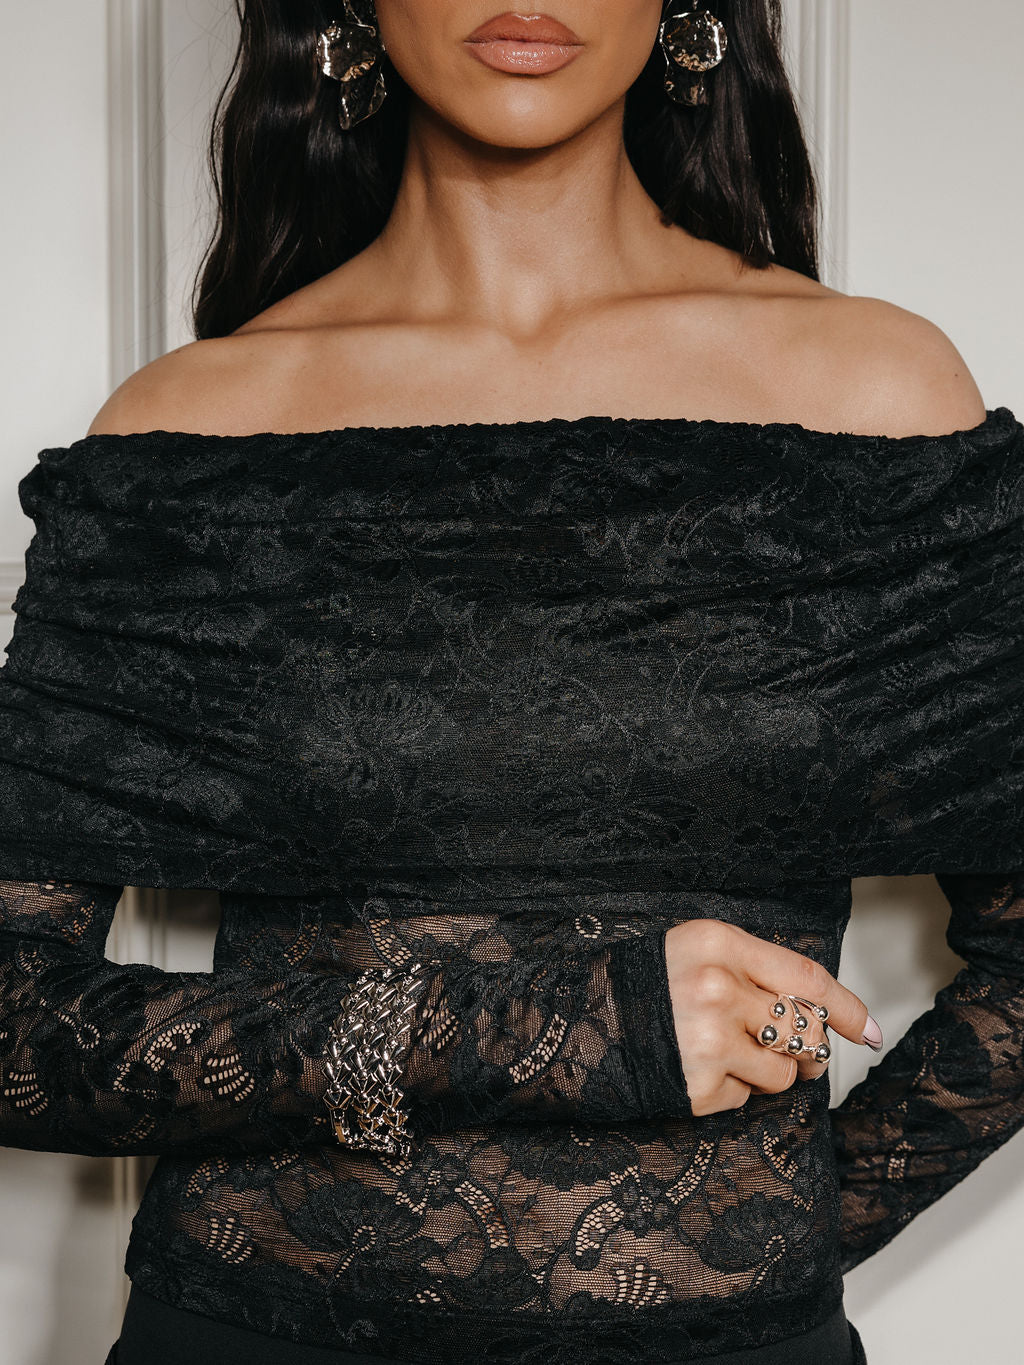 AndreA x Heiður - TWO - The Off Shoulder Top